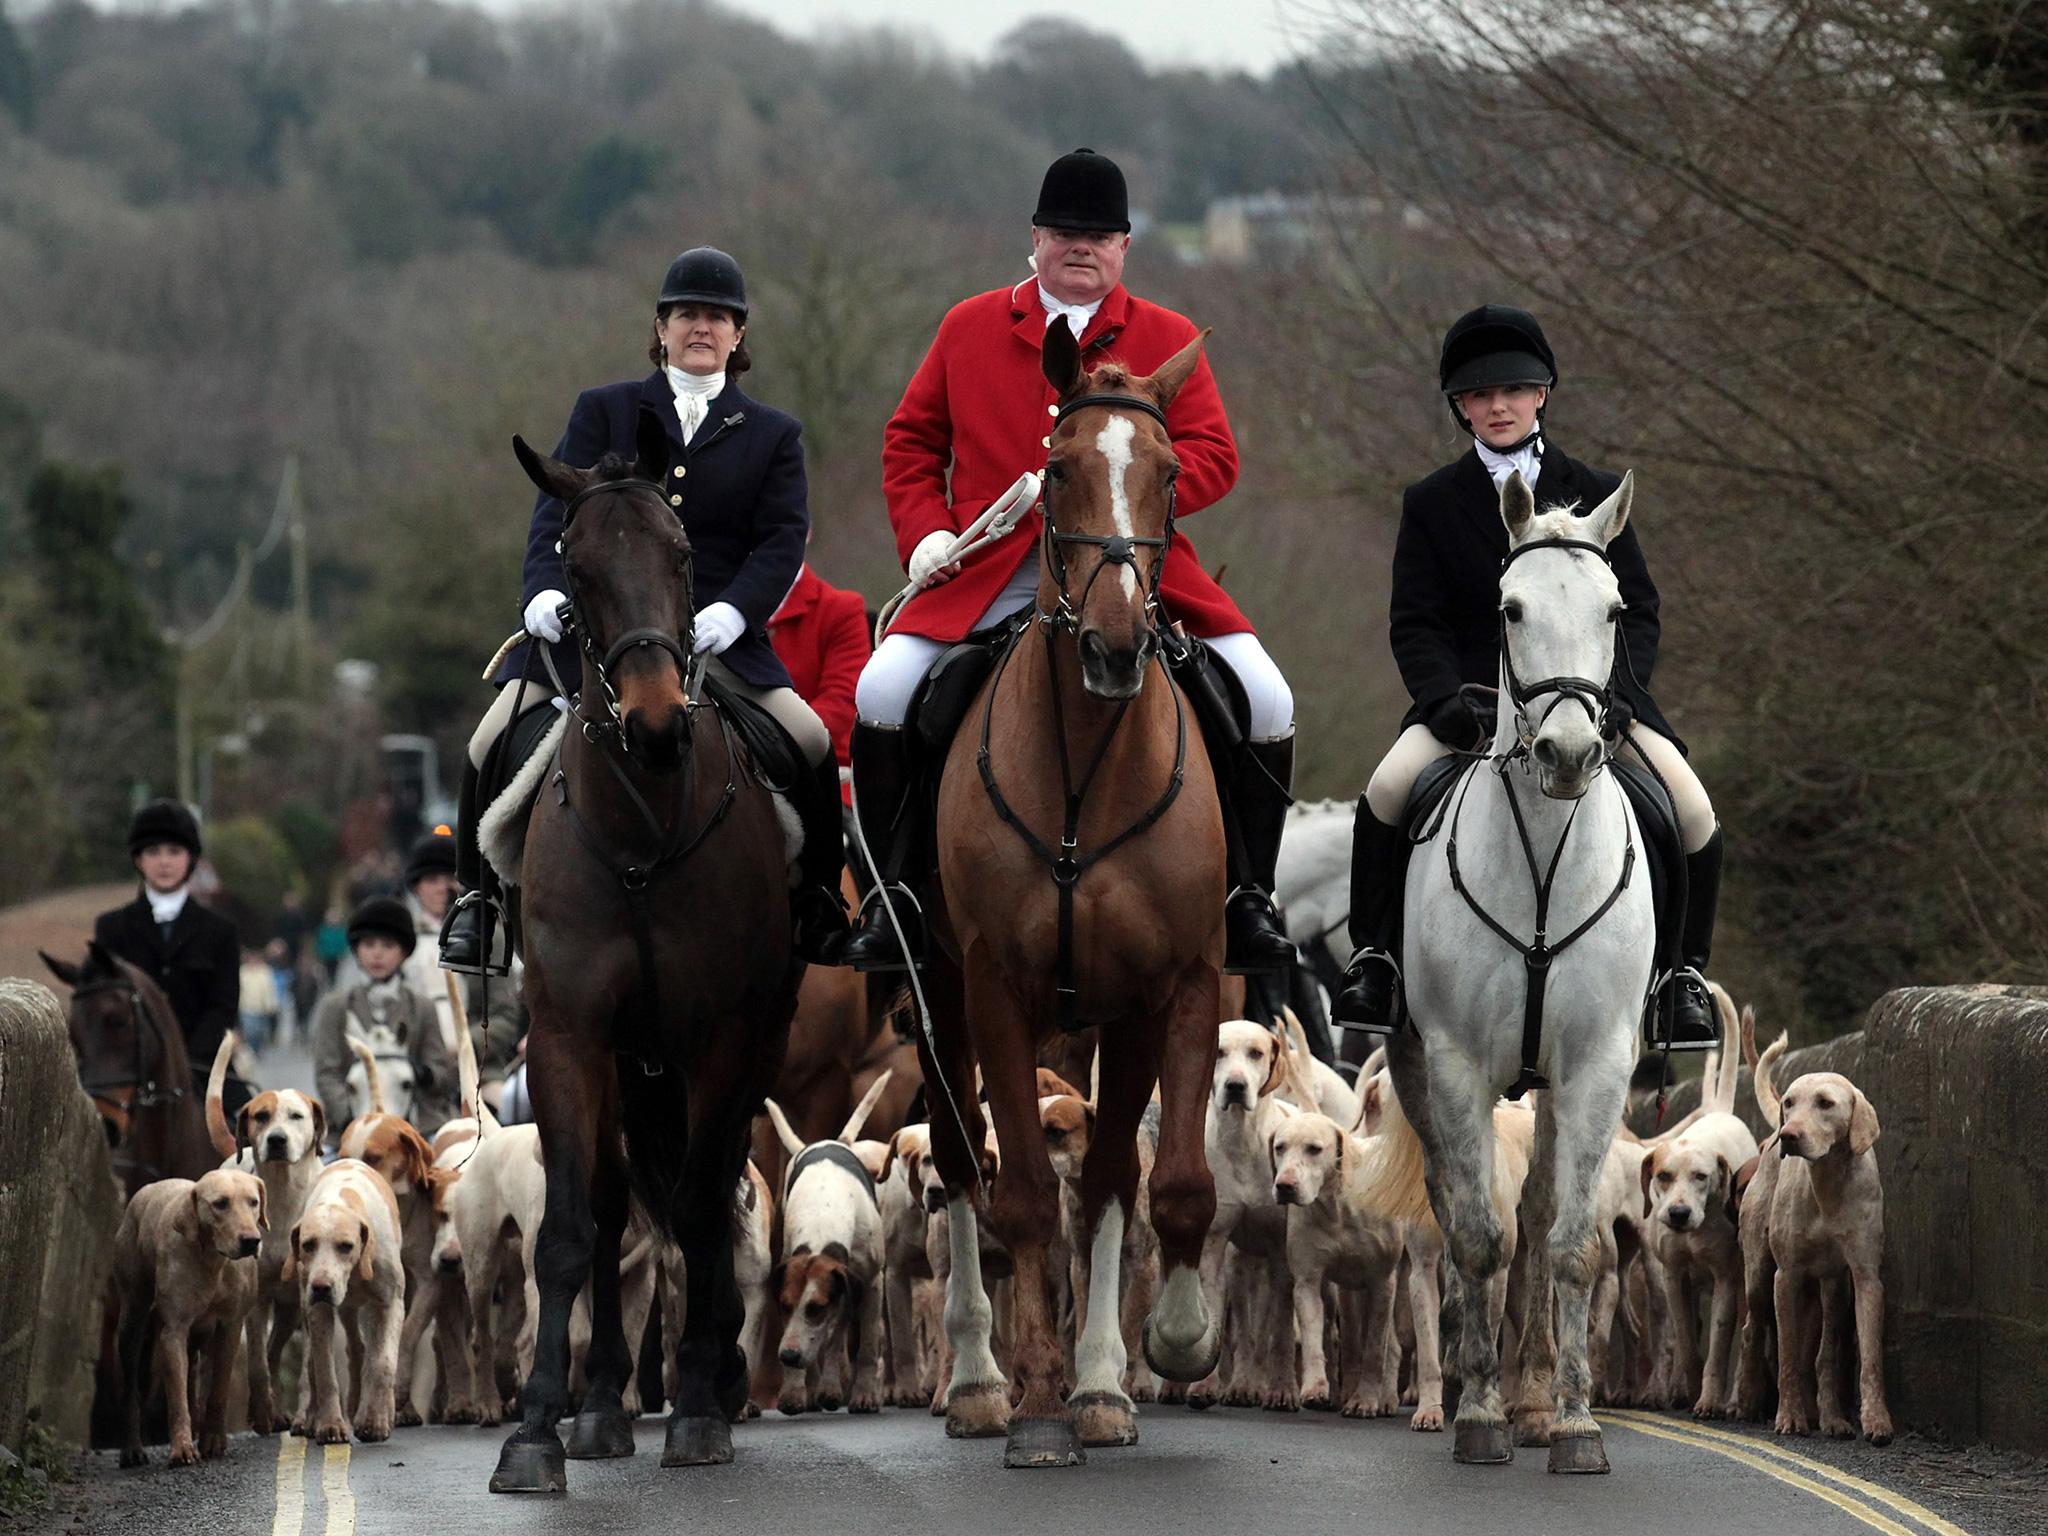 The Environment Secretary Liz Truss has said the hunting ban should have been introduced in the first place.